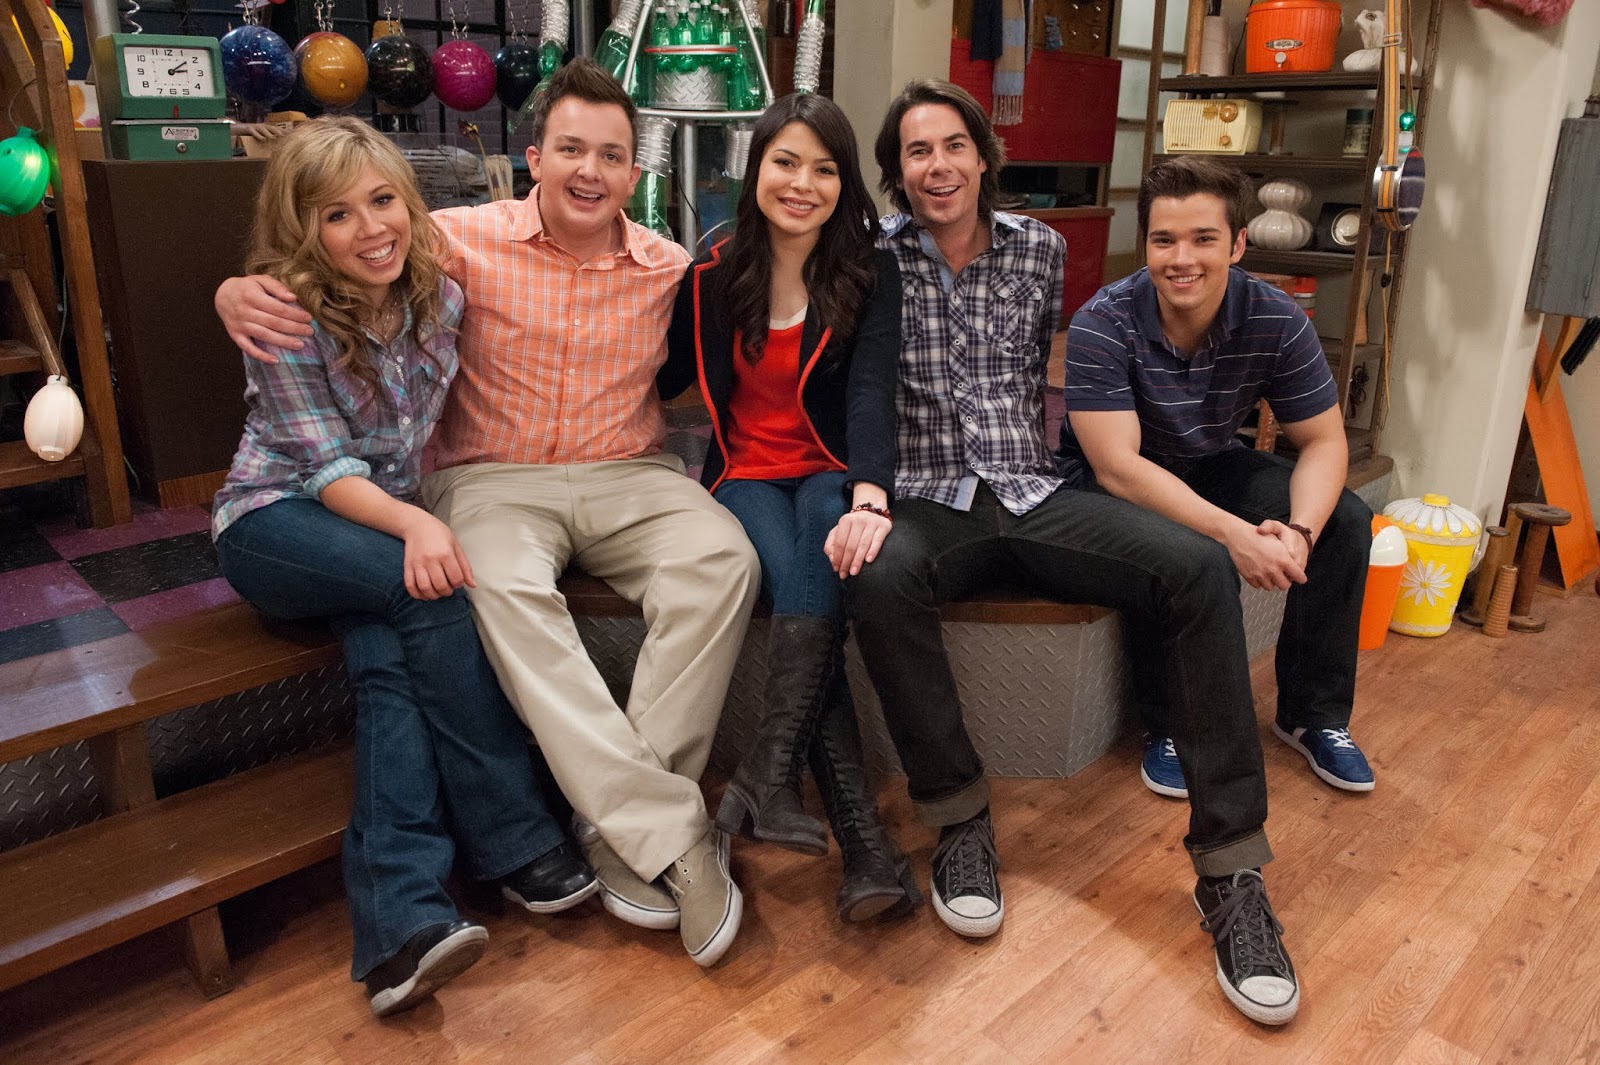 Watch iCarly (2007) Streaming Online - Try for Free